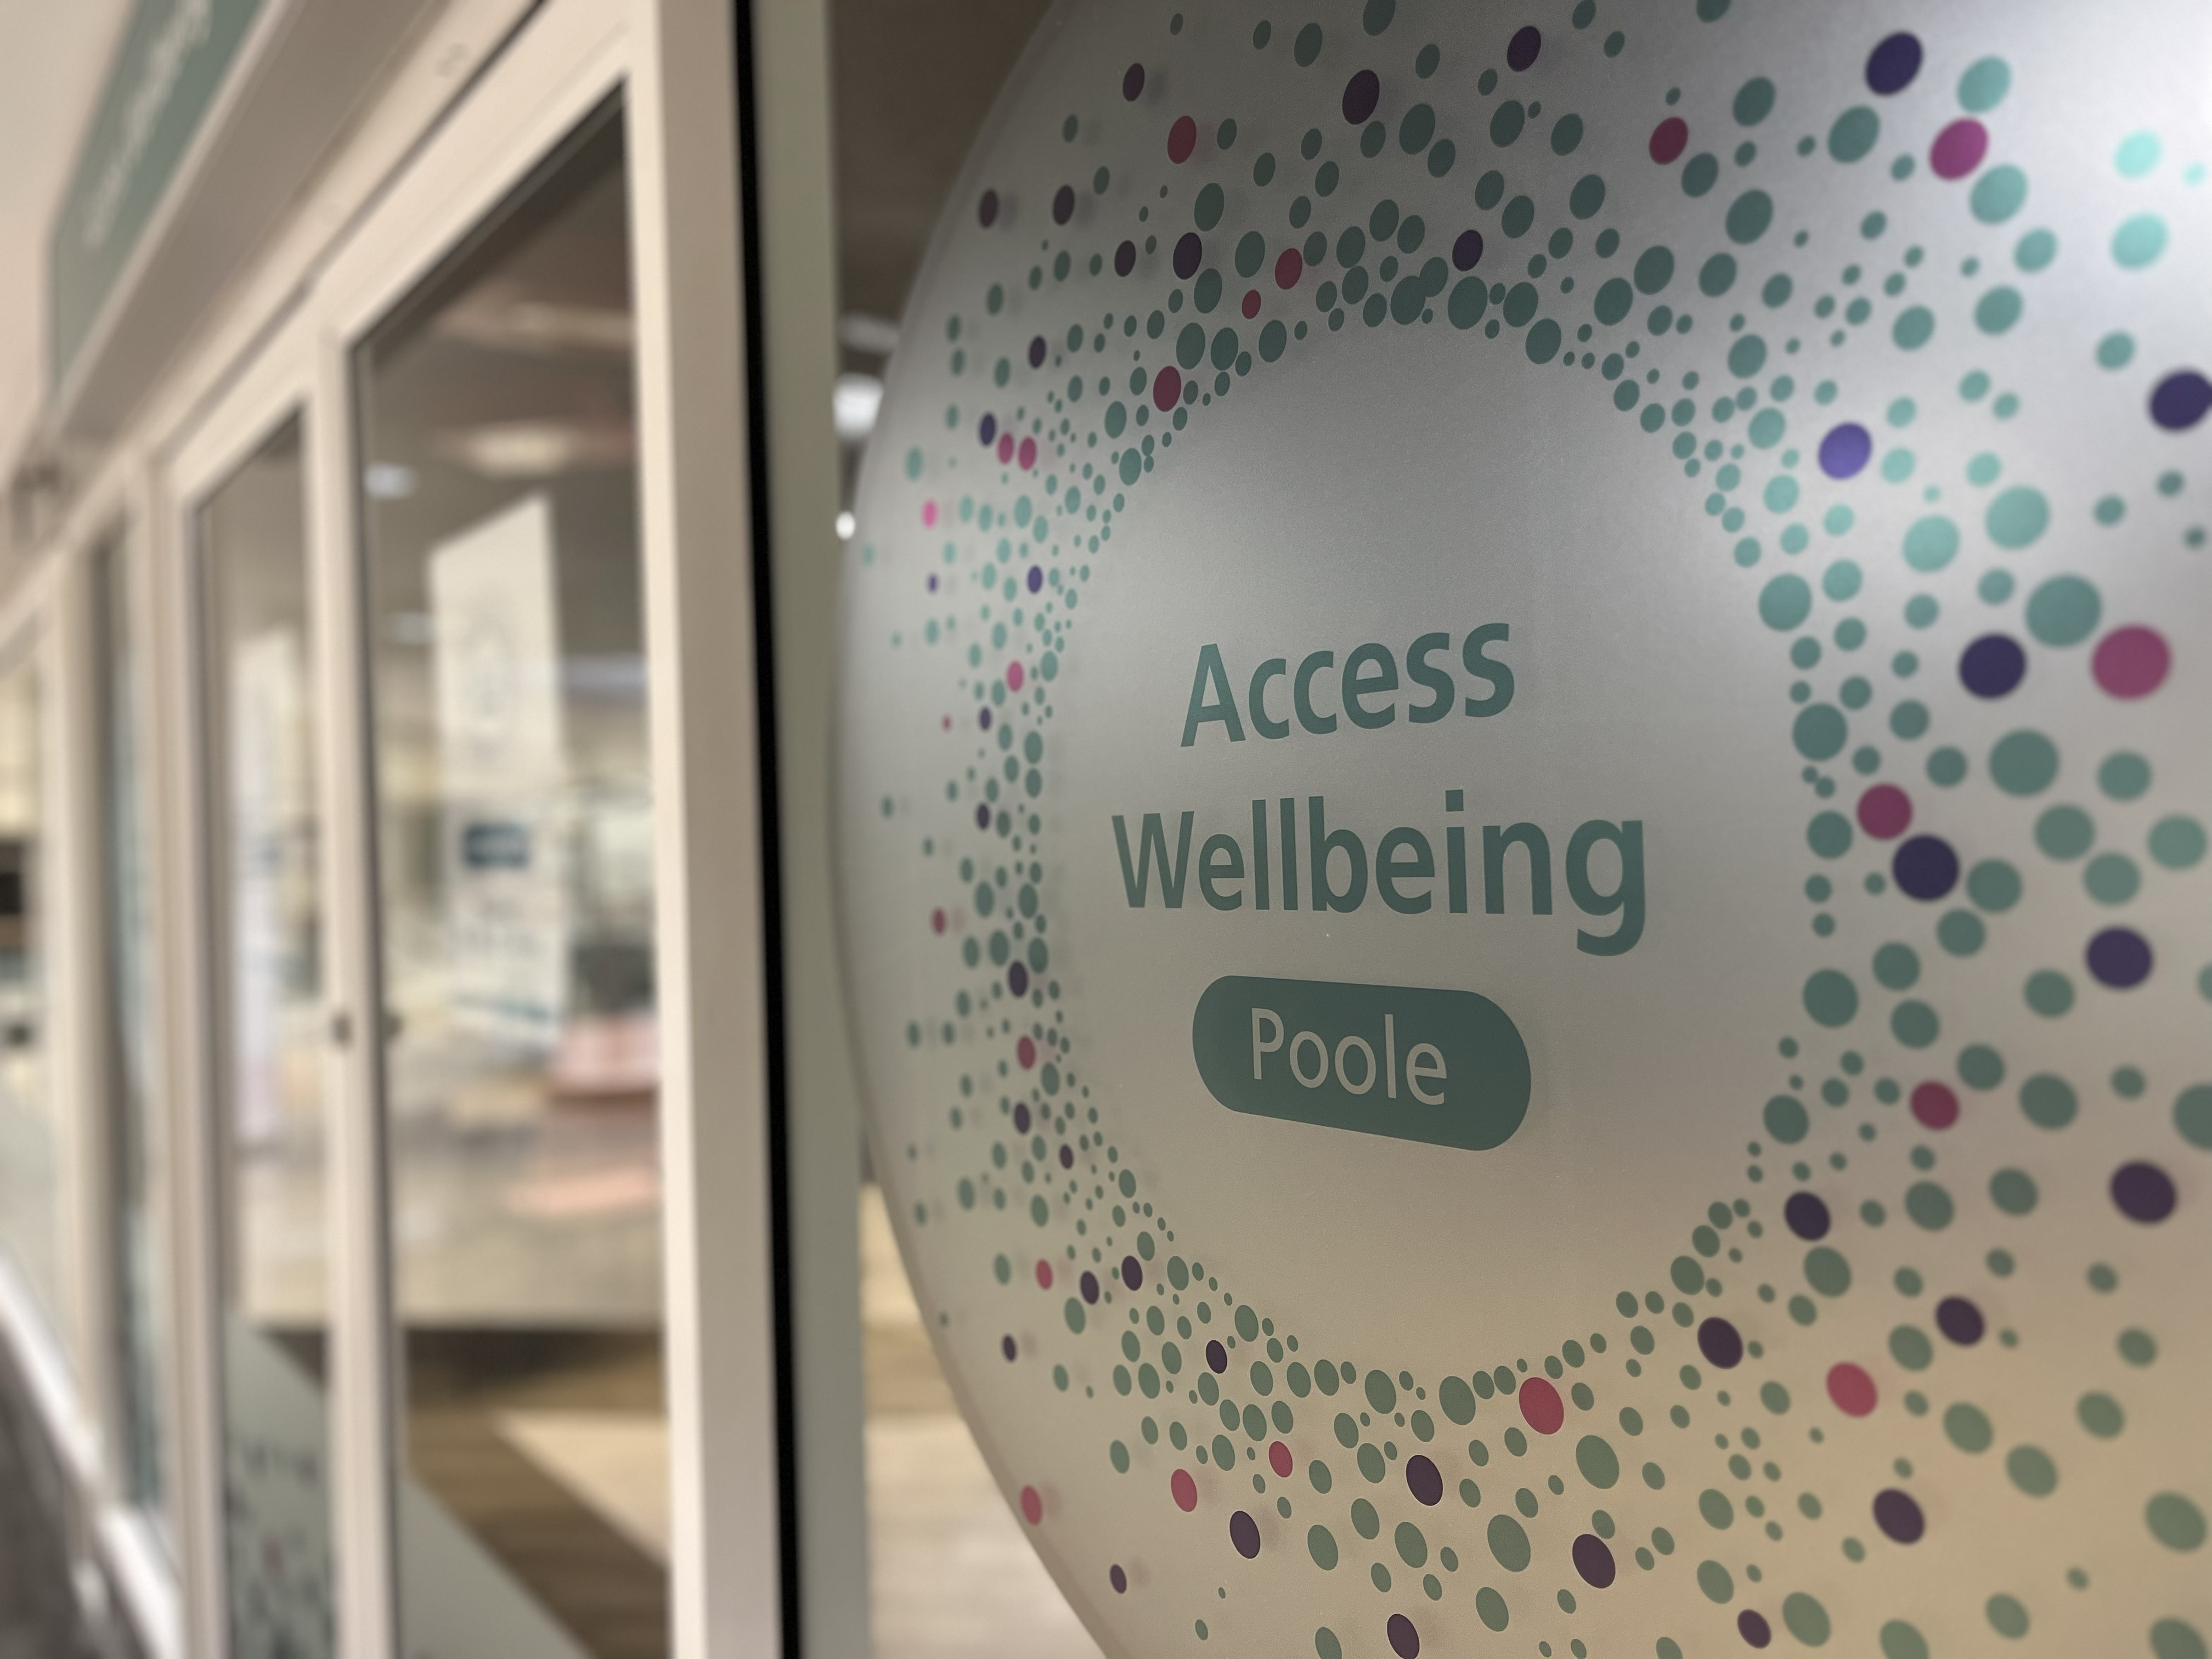 Access Wellbeing Poole sees over 400 visitors in the first month